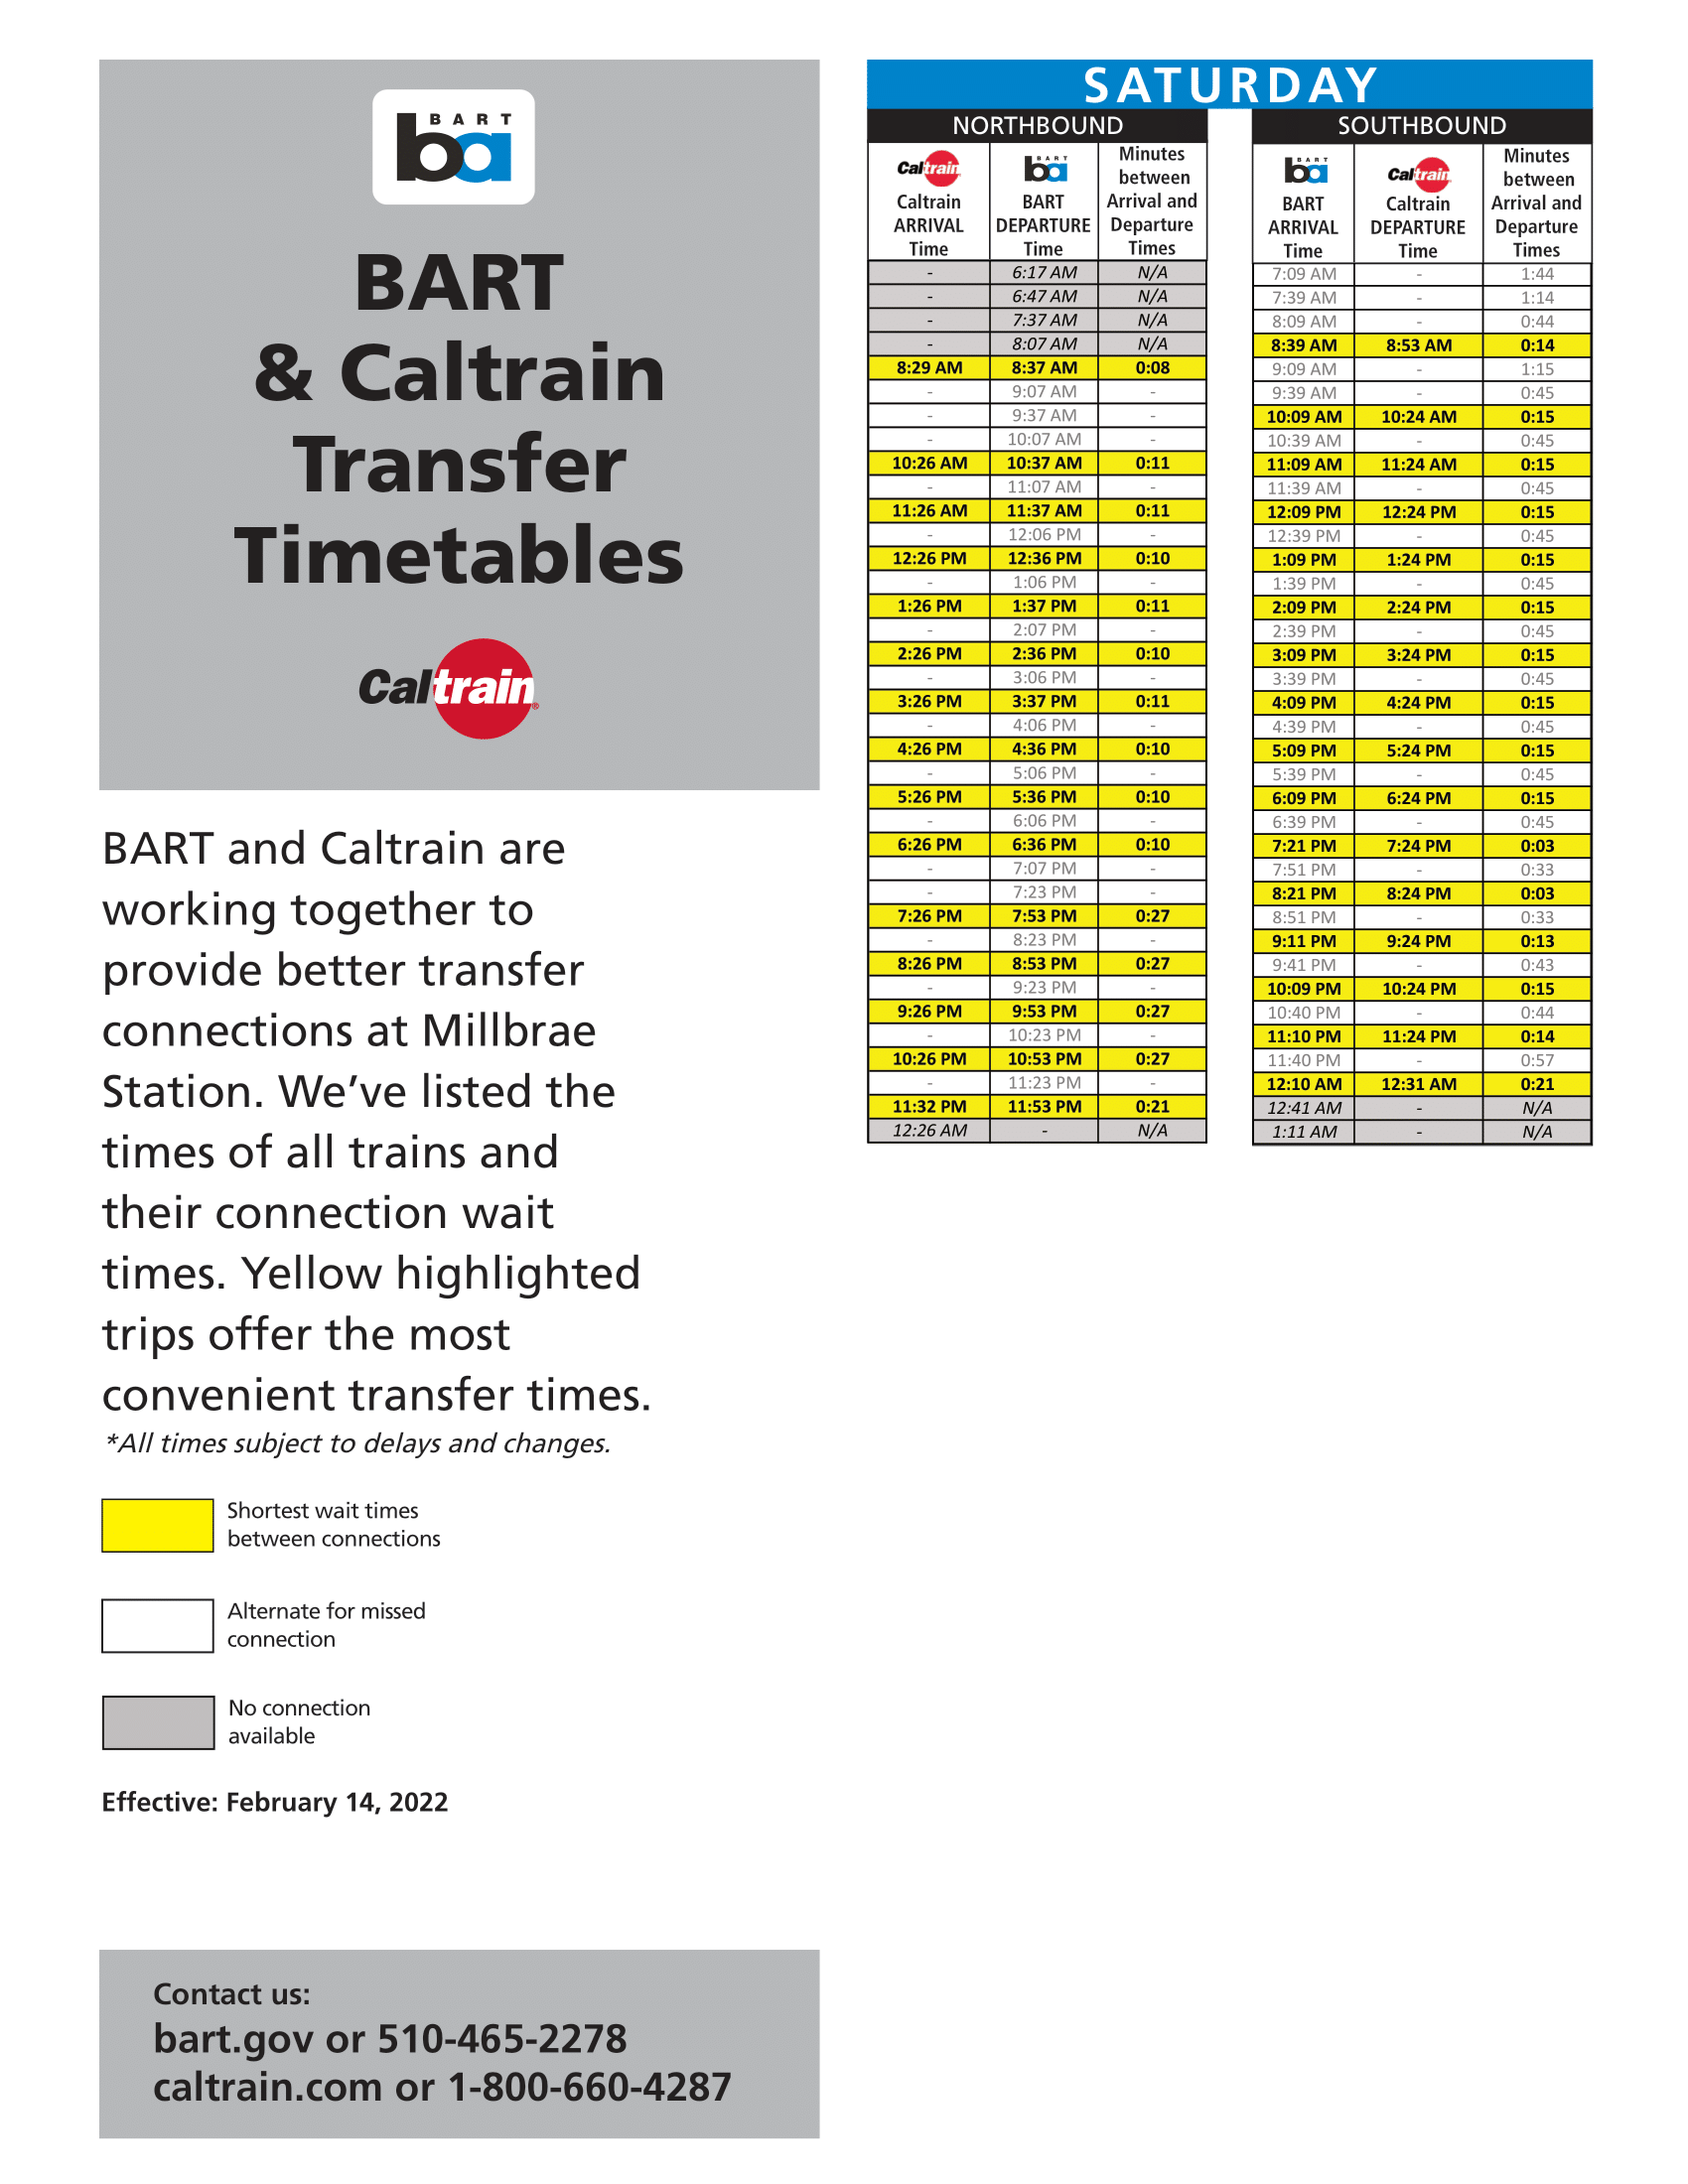 Saturday BART and Caltrain transfer times reflecting February 14, 2022 schedule change